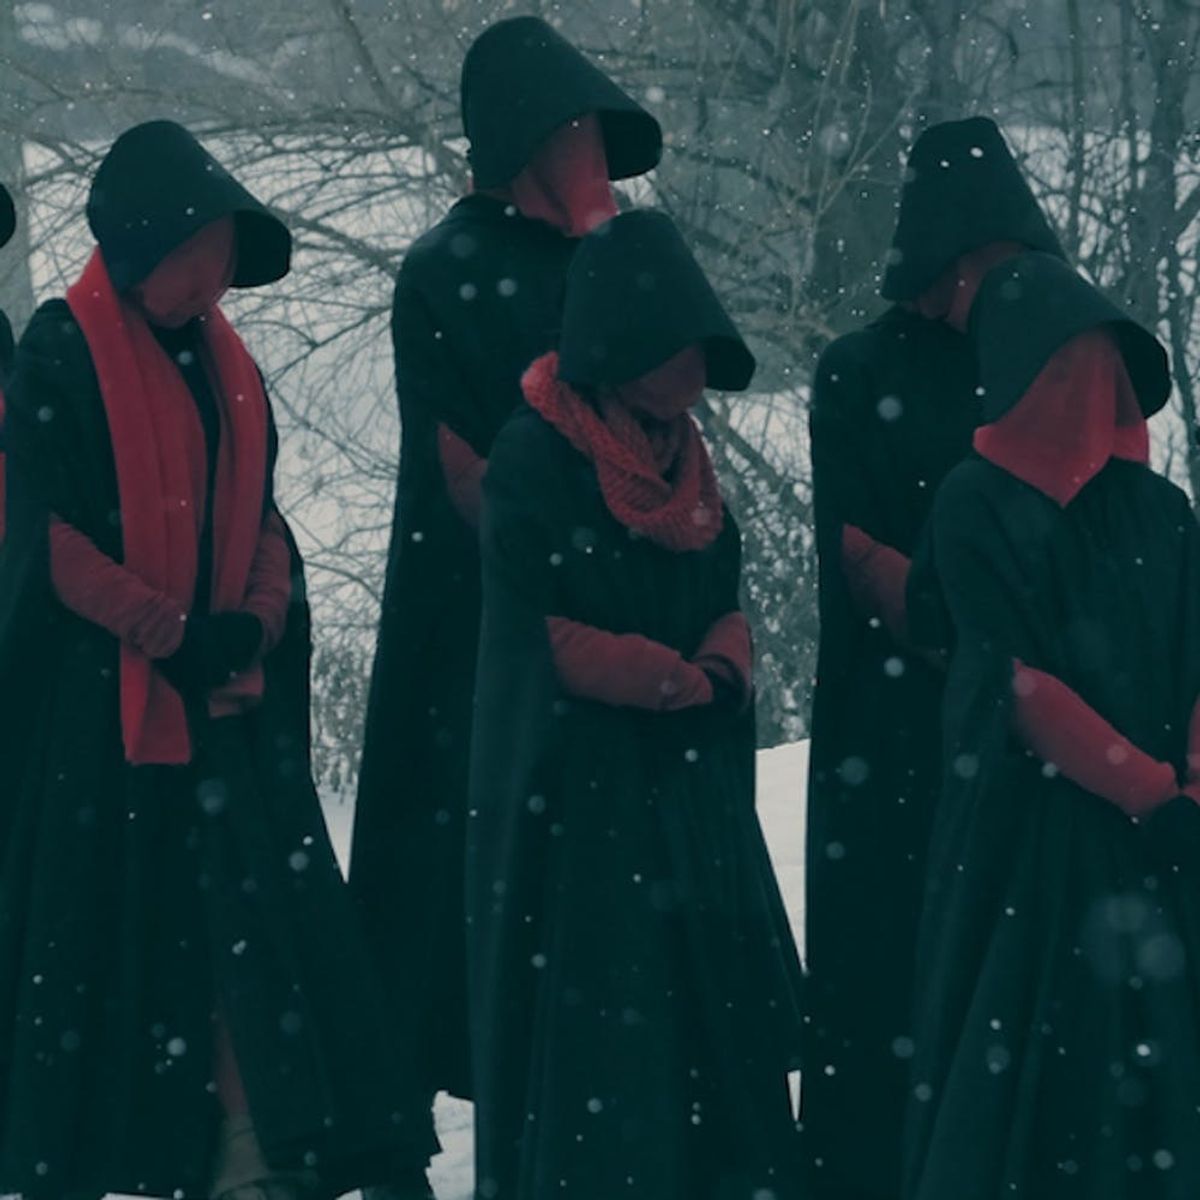 ‘The Handmaid’s Tale’ Season 2 Finally Has a Release Date — and a Chilling New Trailer